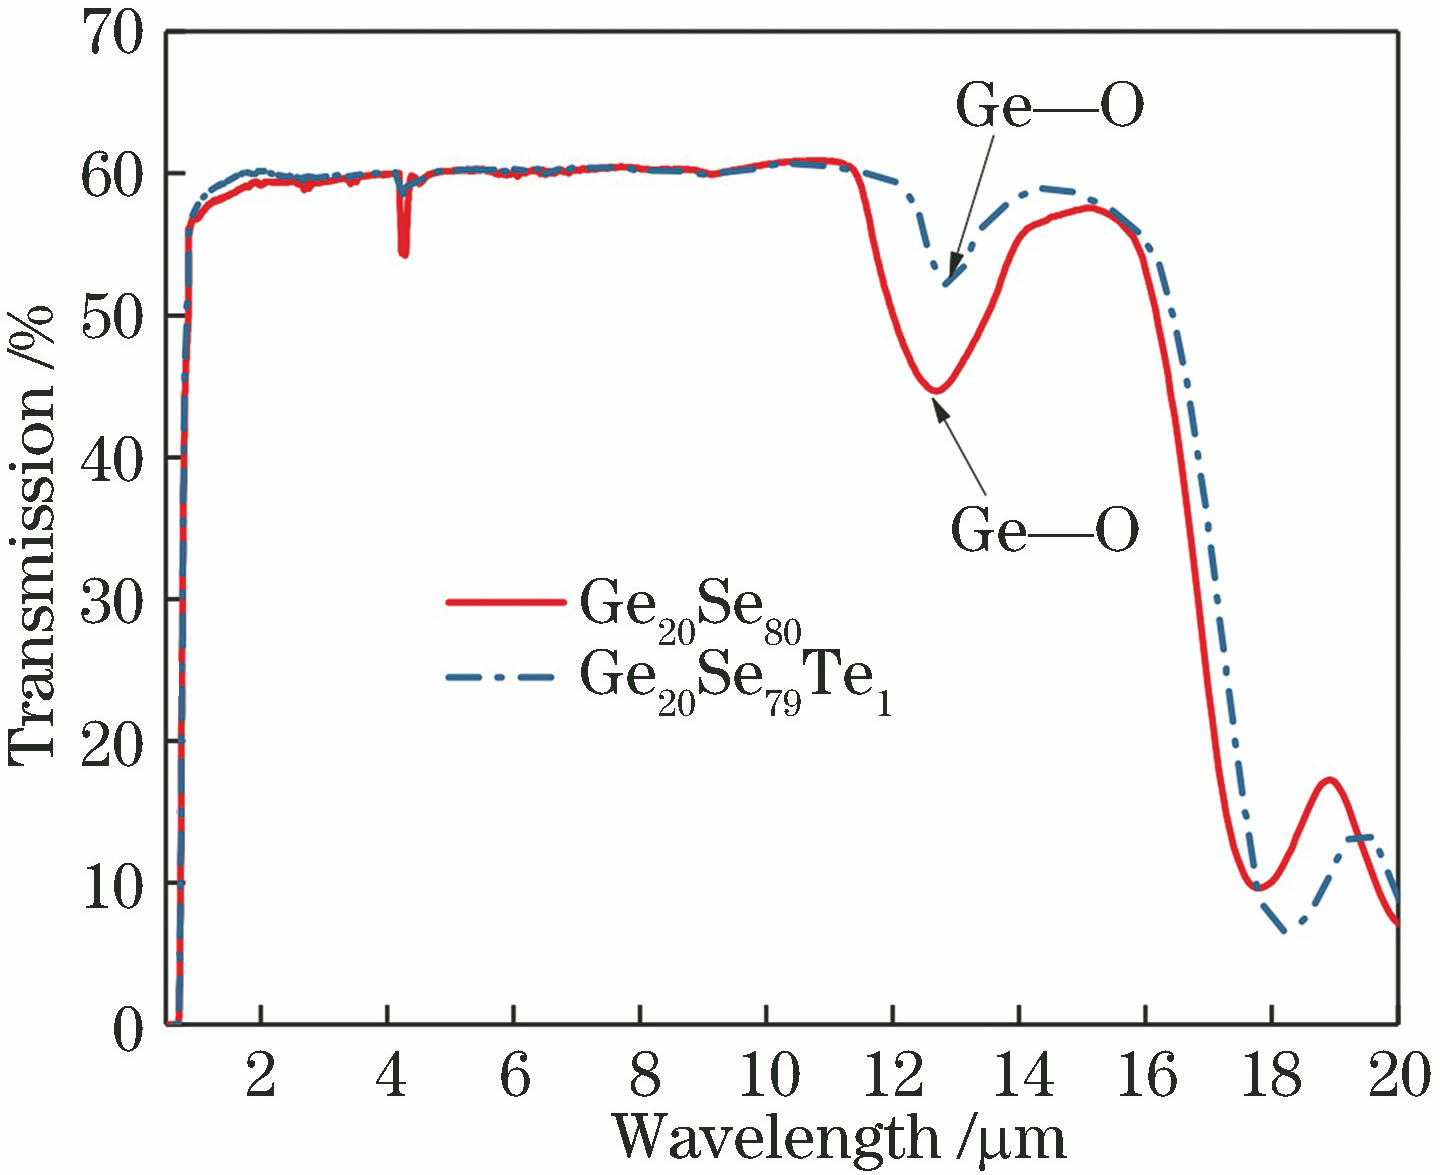 Infrared transmission spectra of Ge20Se79Te1 and Ge20Se80